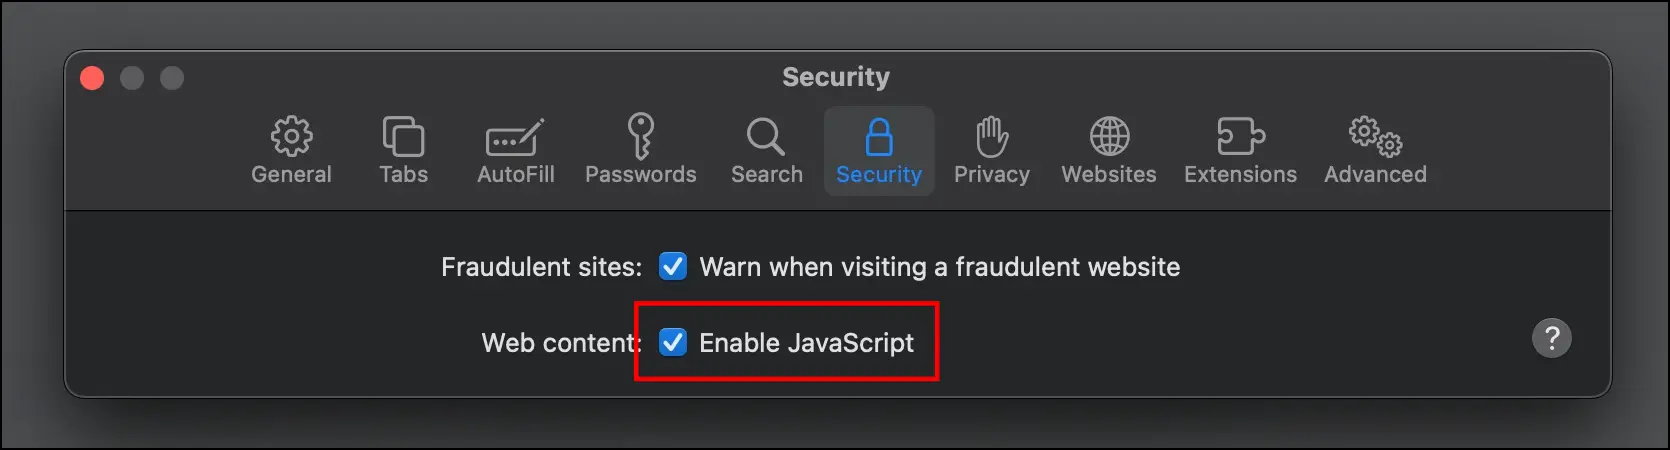 Disable JavaScript: Browser Security Tips, Tricks, and Features to Stay Safe Online